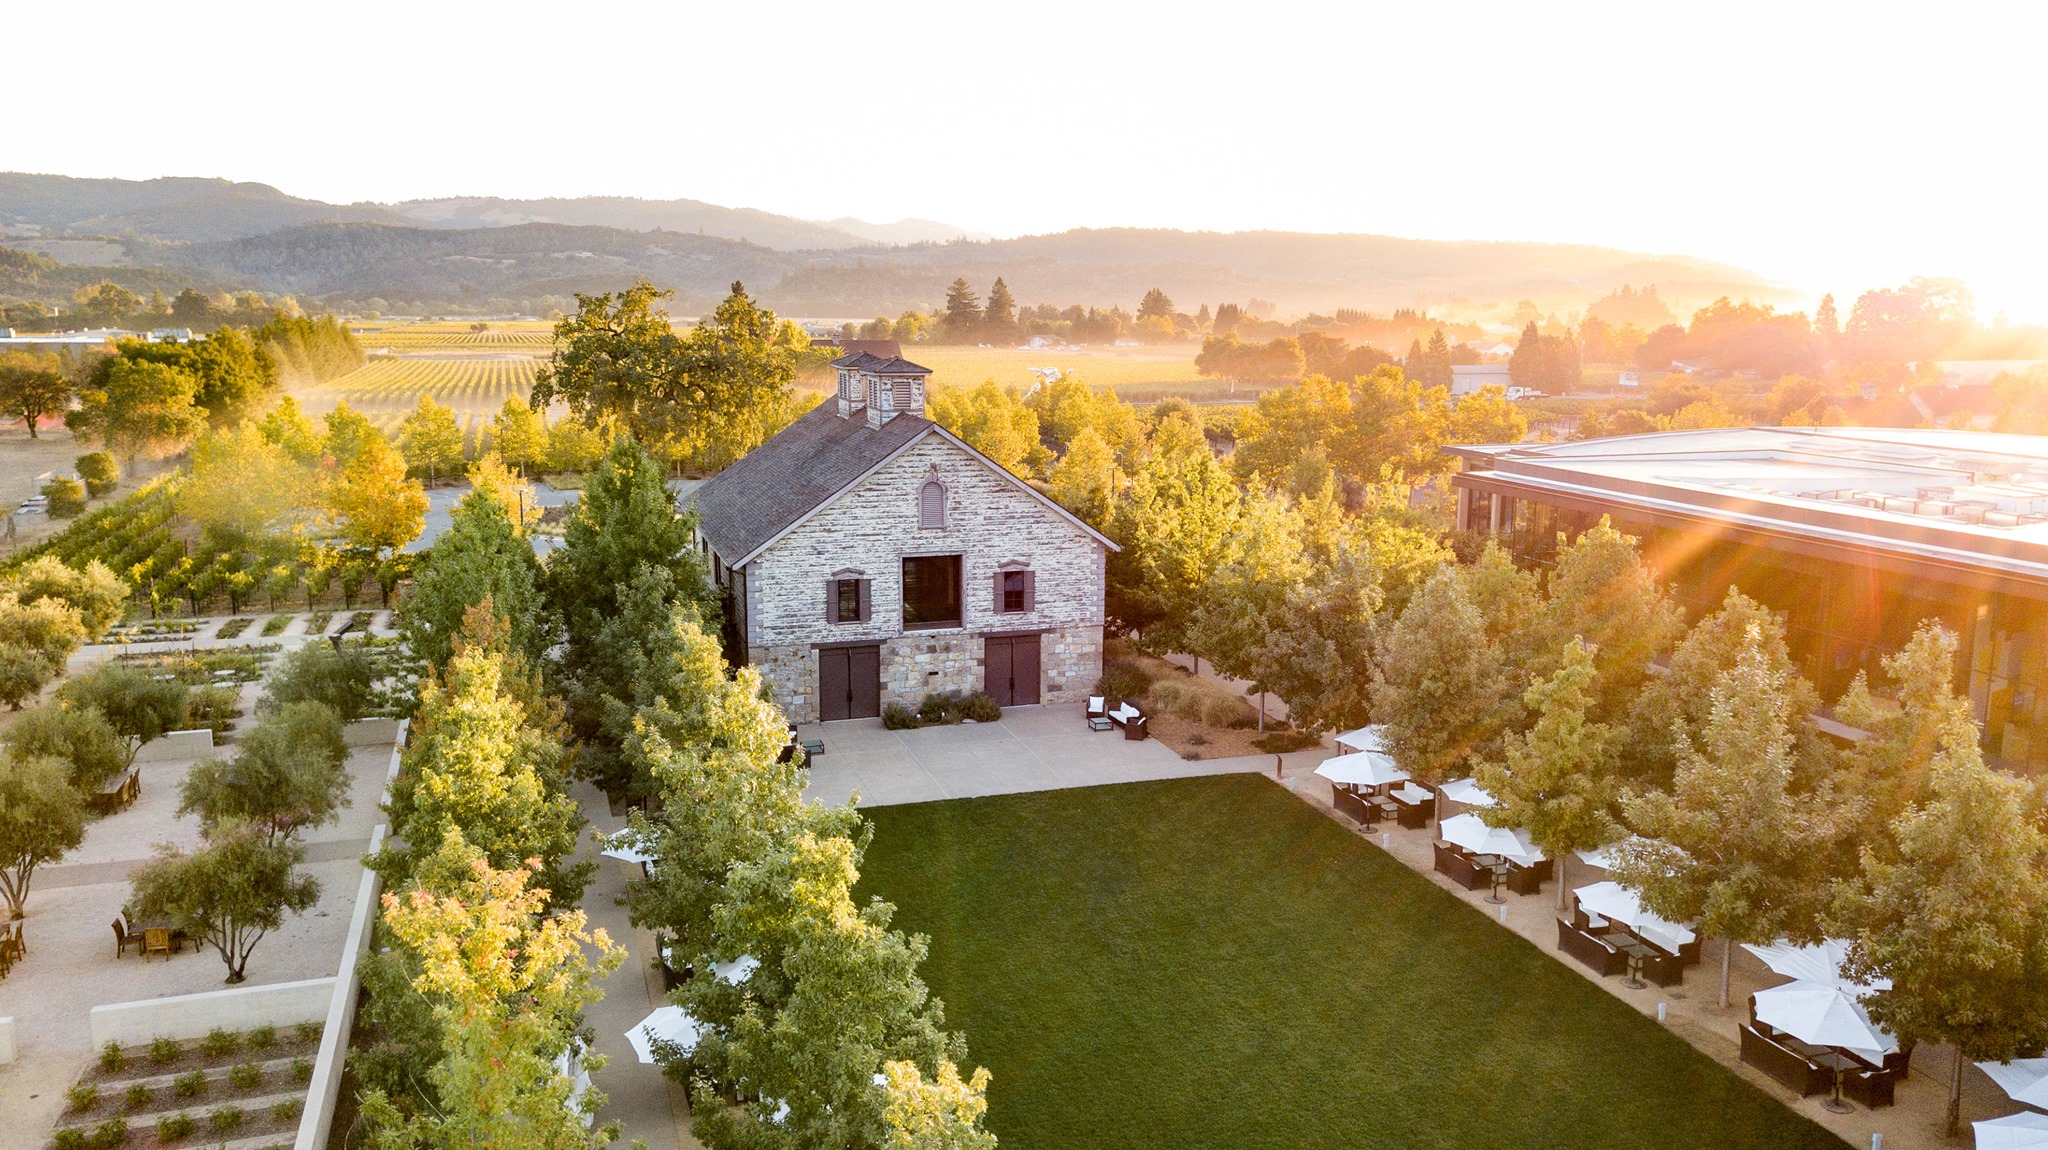 20 Best Things to Do in Napa Valley